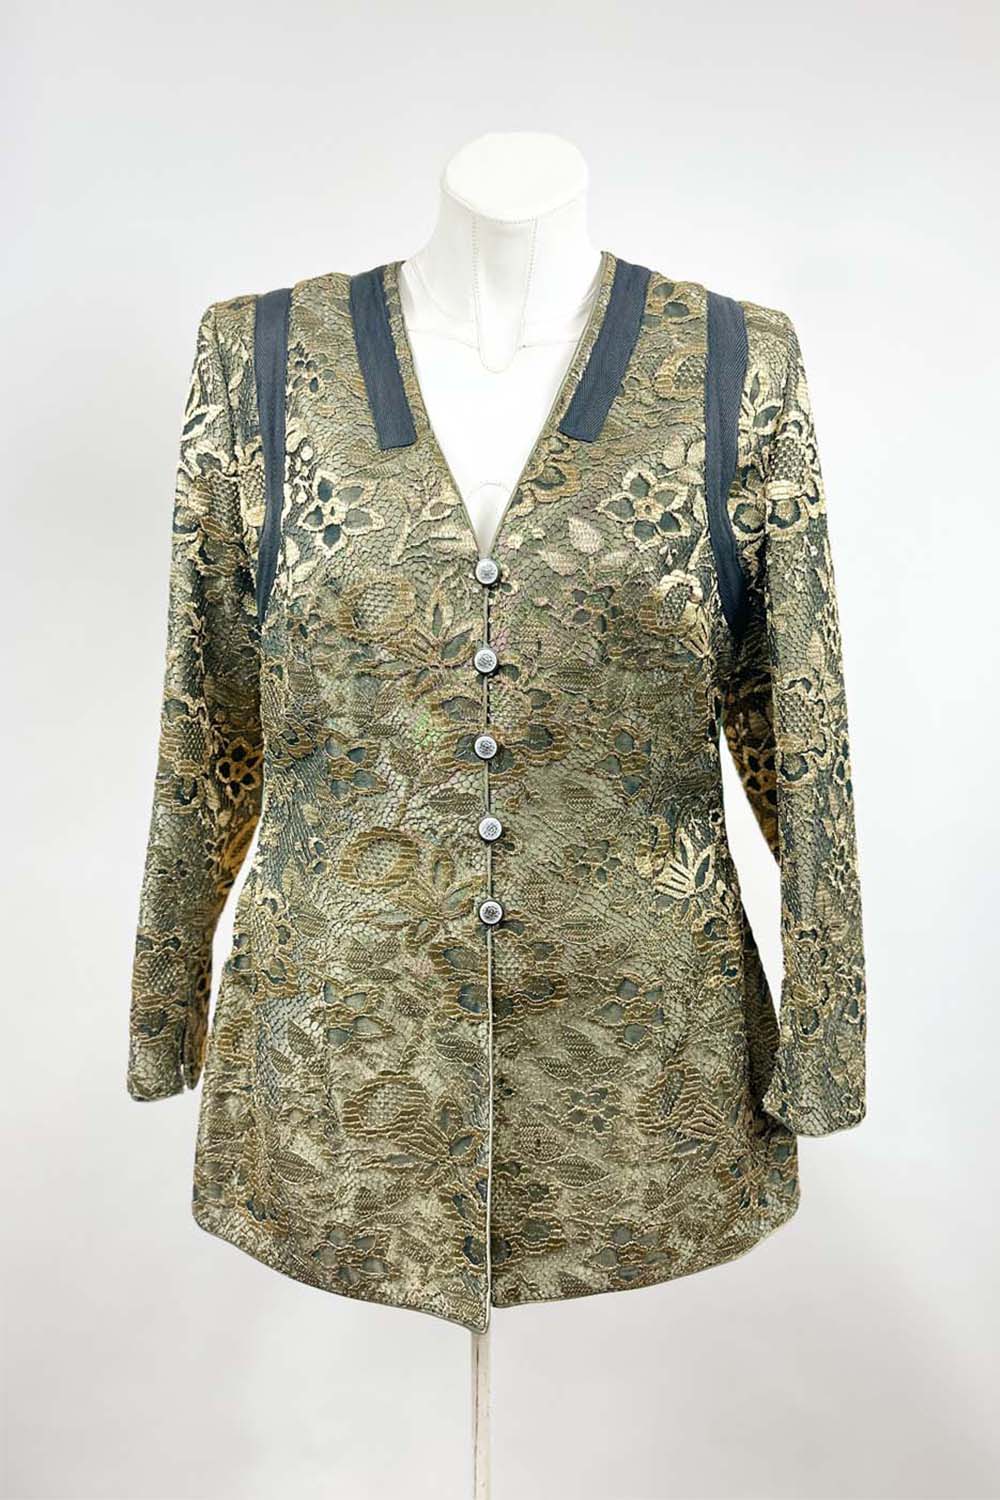 OKIMMI GOLD LACE JACKET WITH YELLOW APRON PATCH FRONT